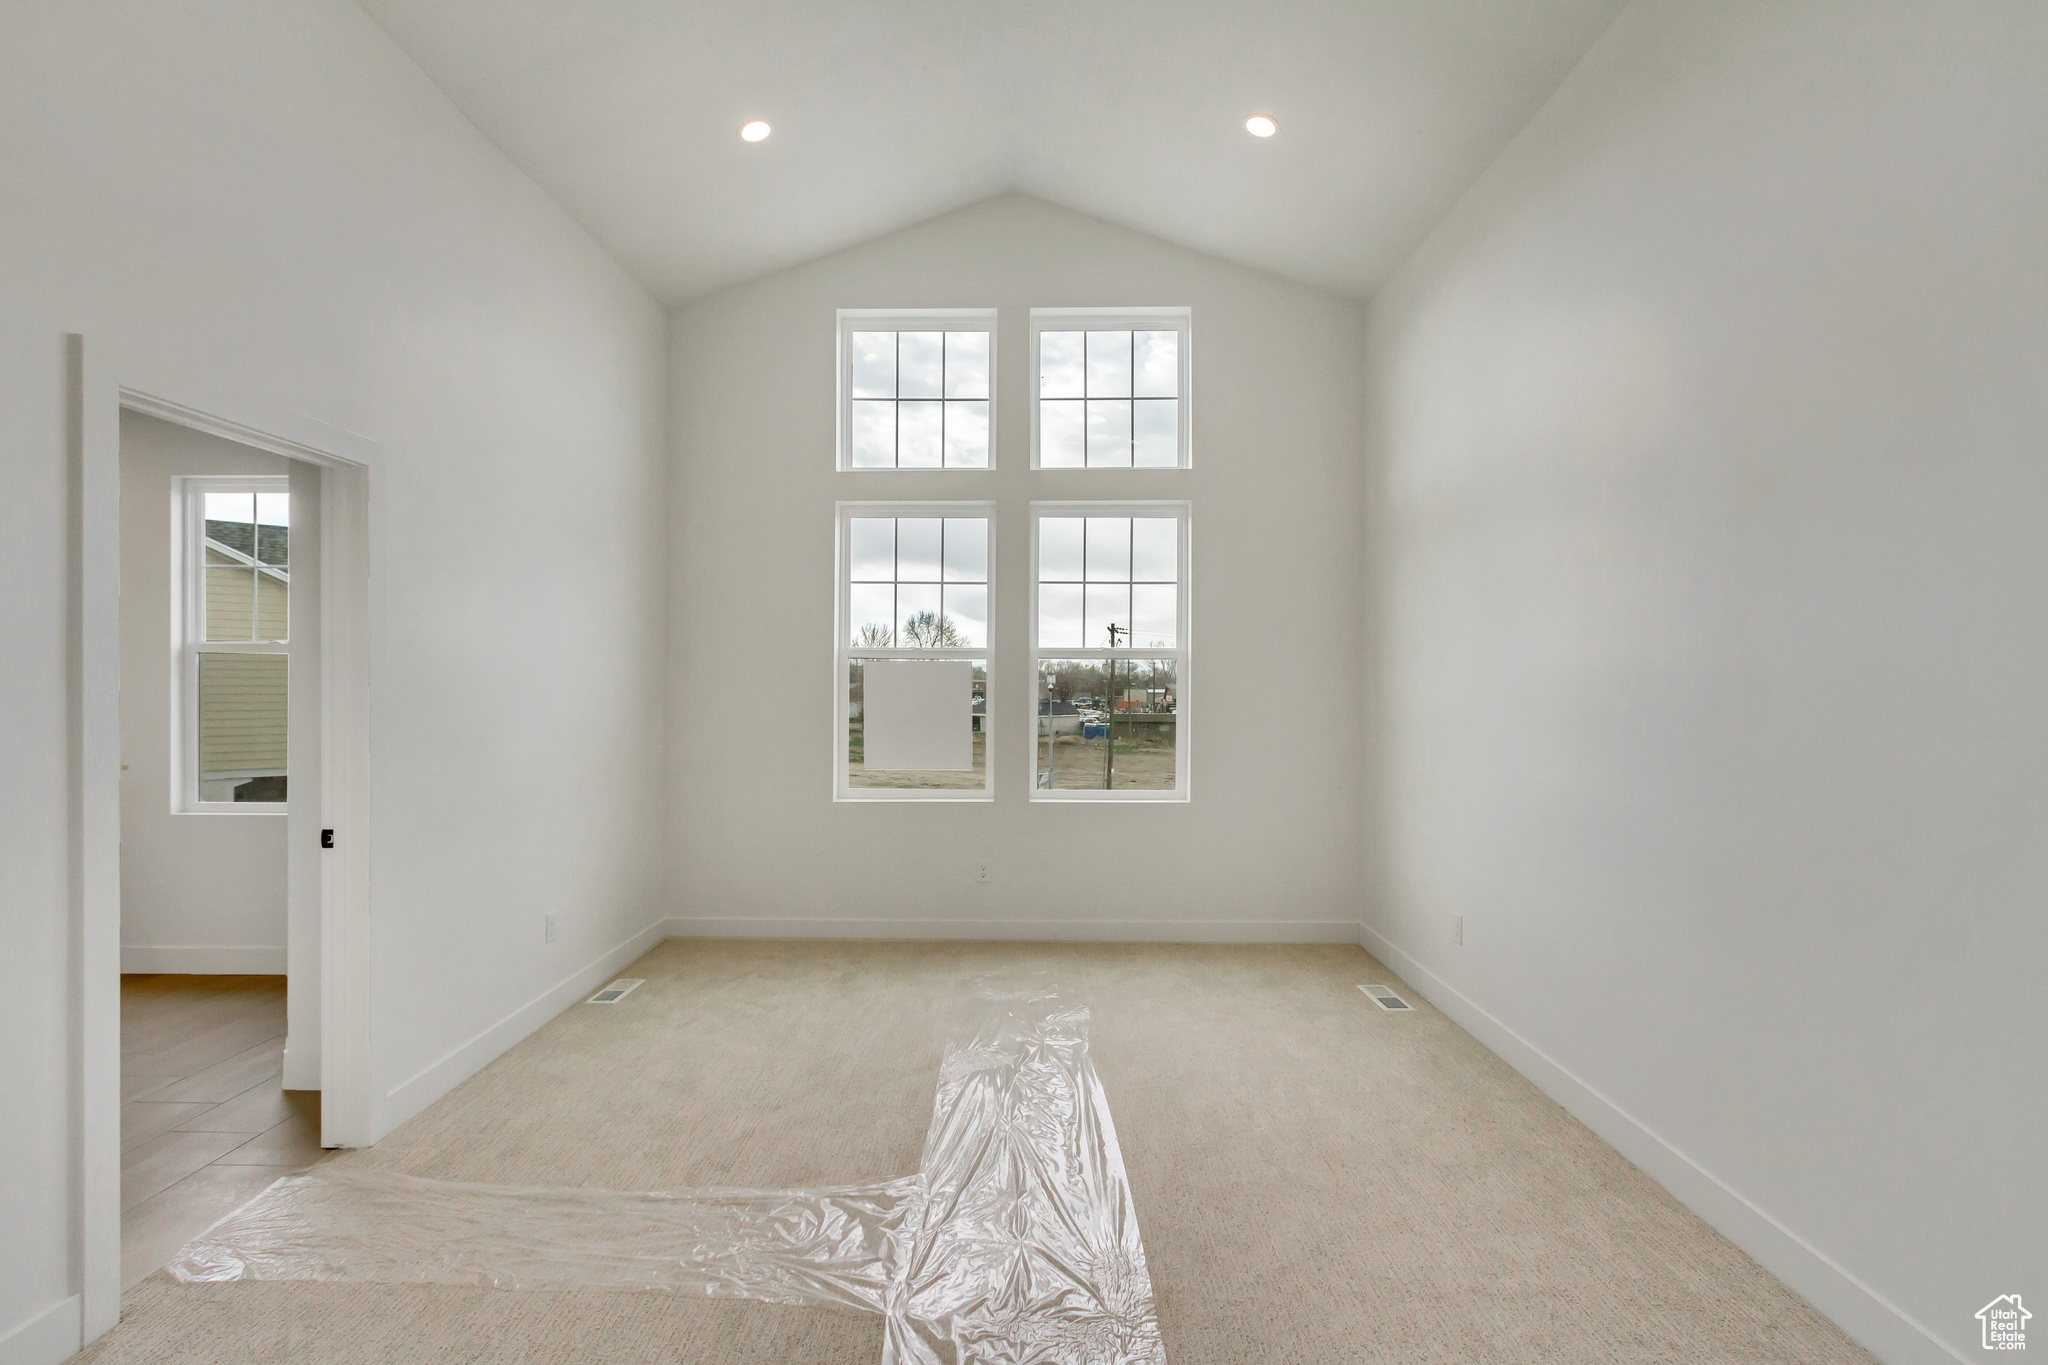 Unfurnished room with light carpet and lofted ceiling